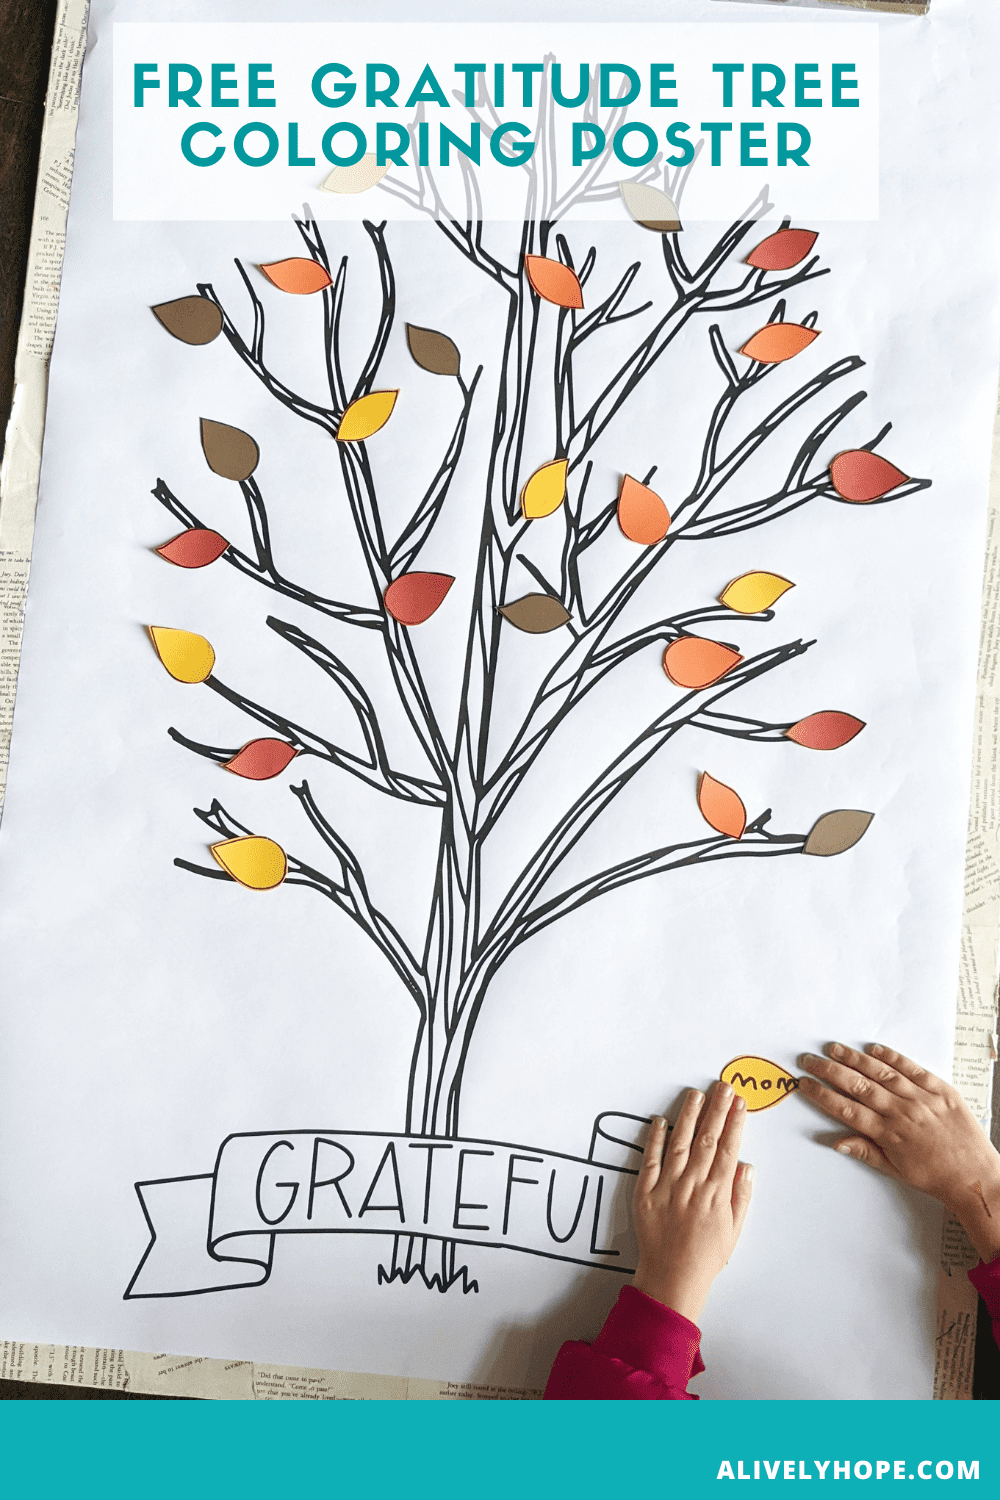 Gratitude tree giant coloring poster free printable a lively hope